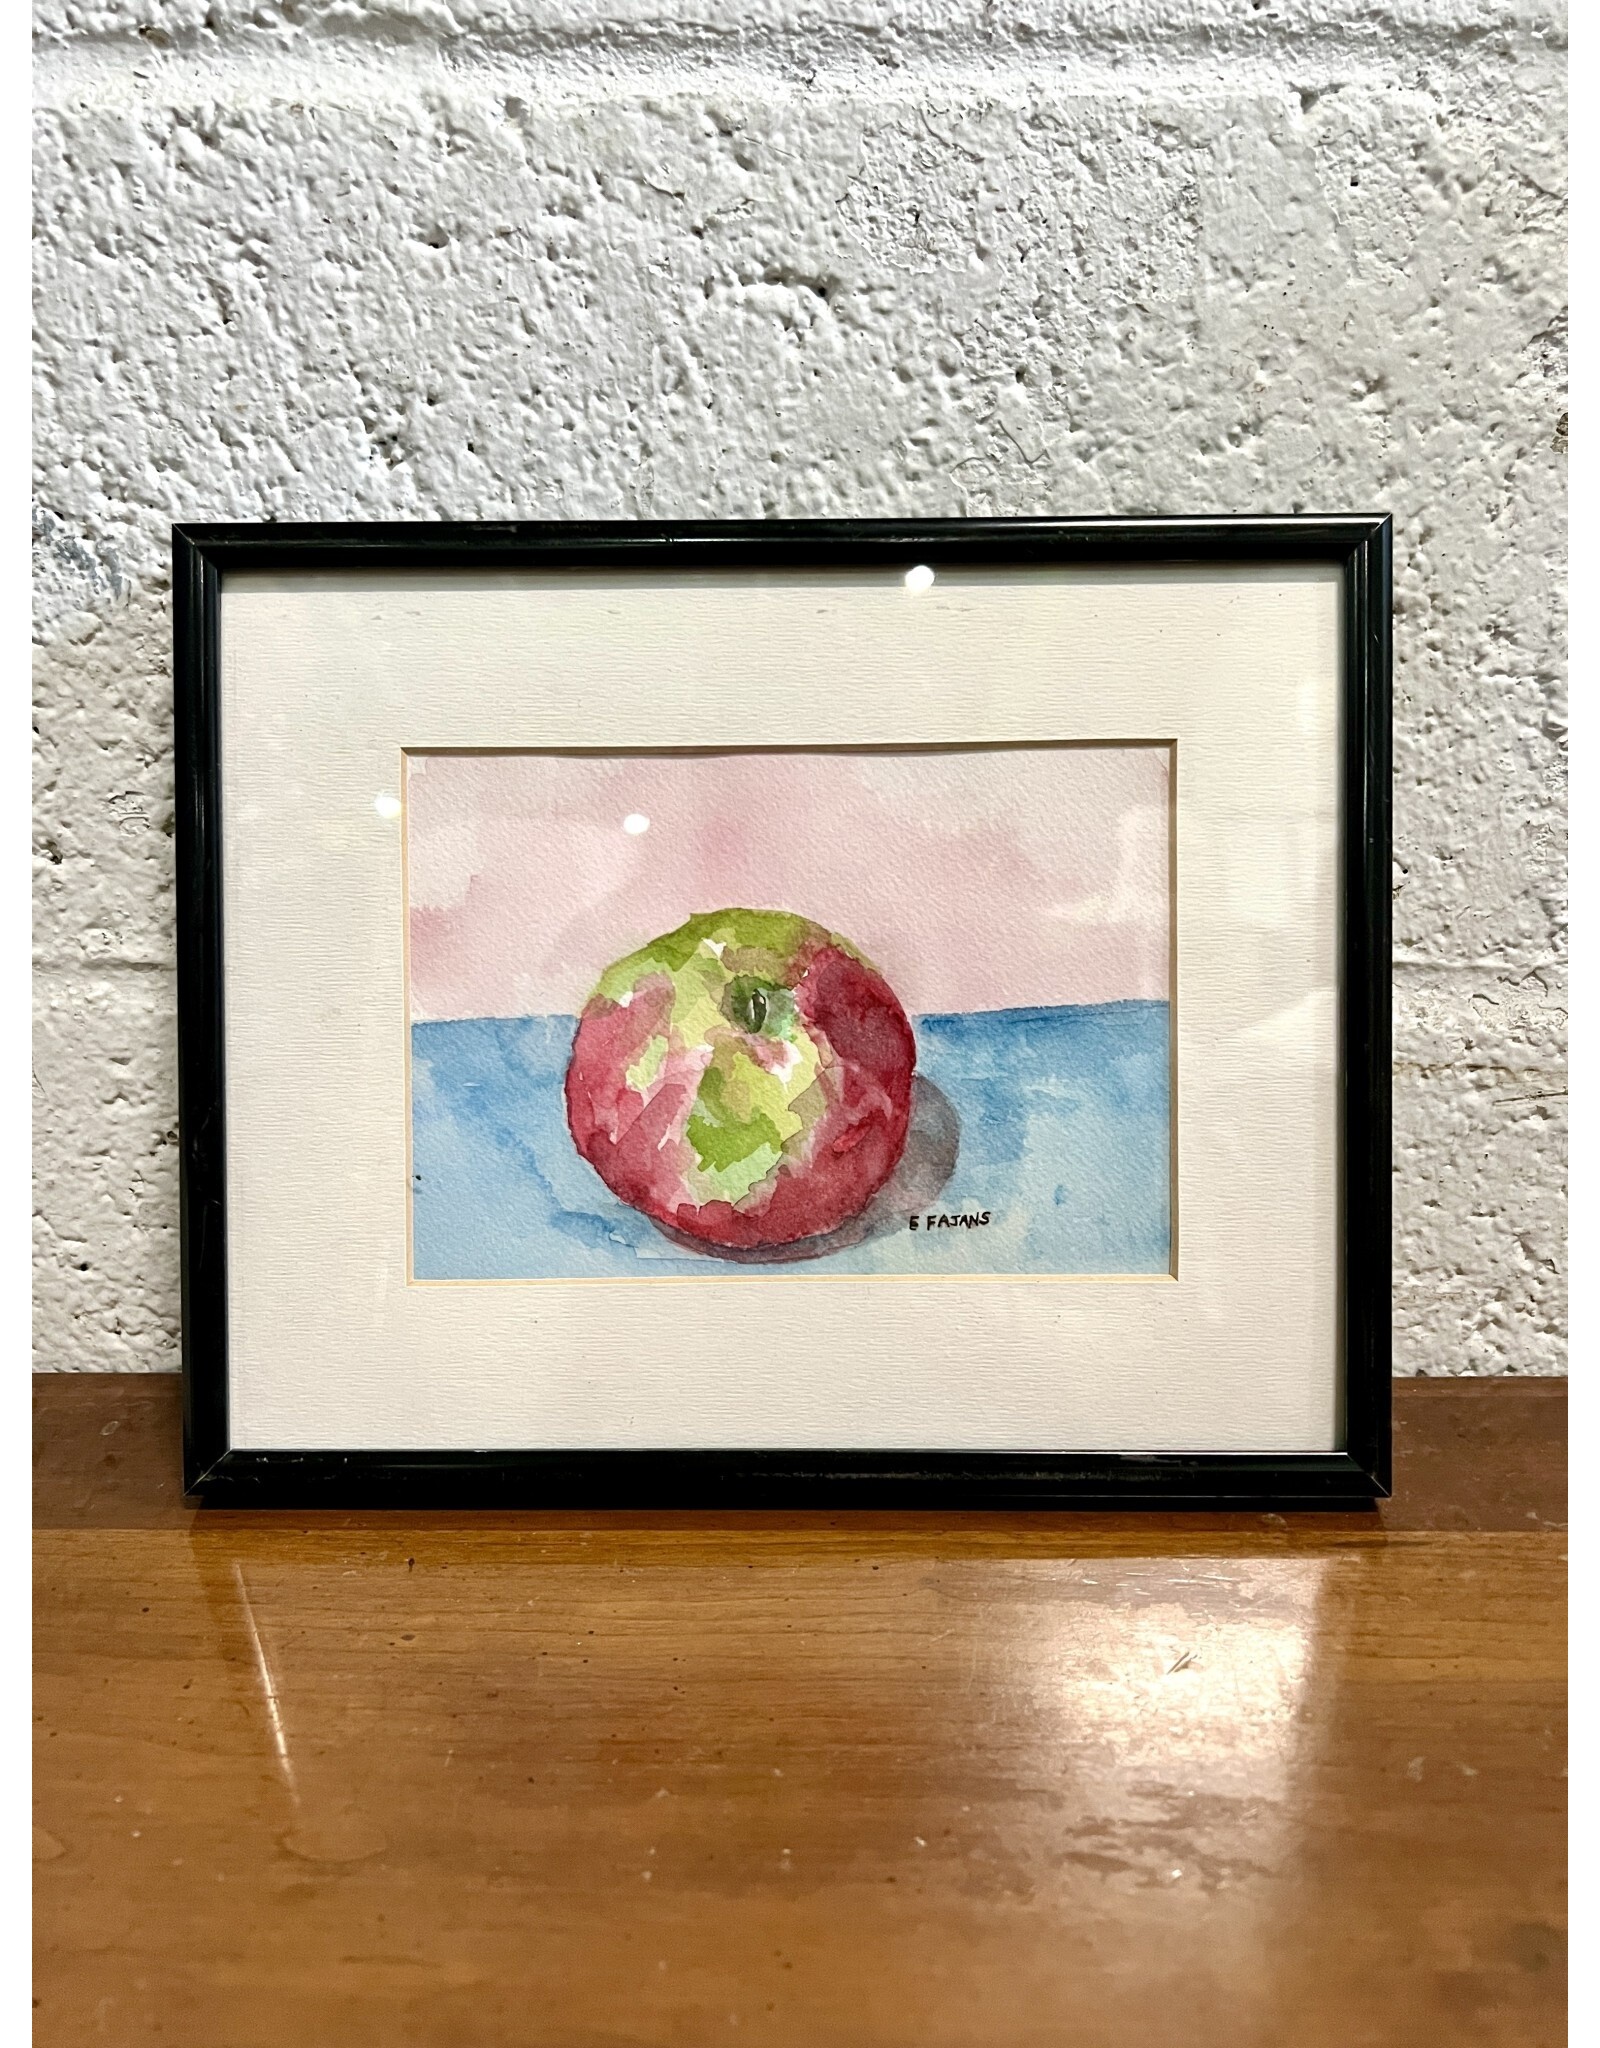 Fruity, framed watercolor painting, sgnd Fajans